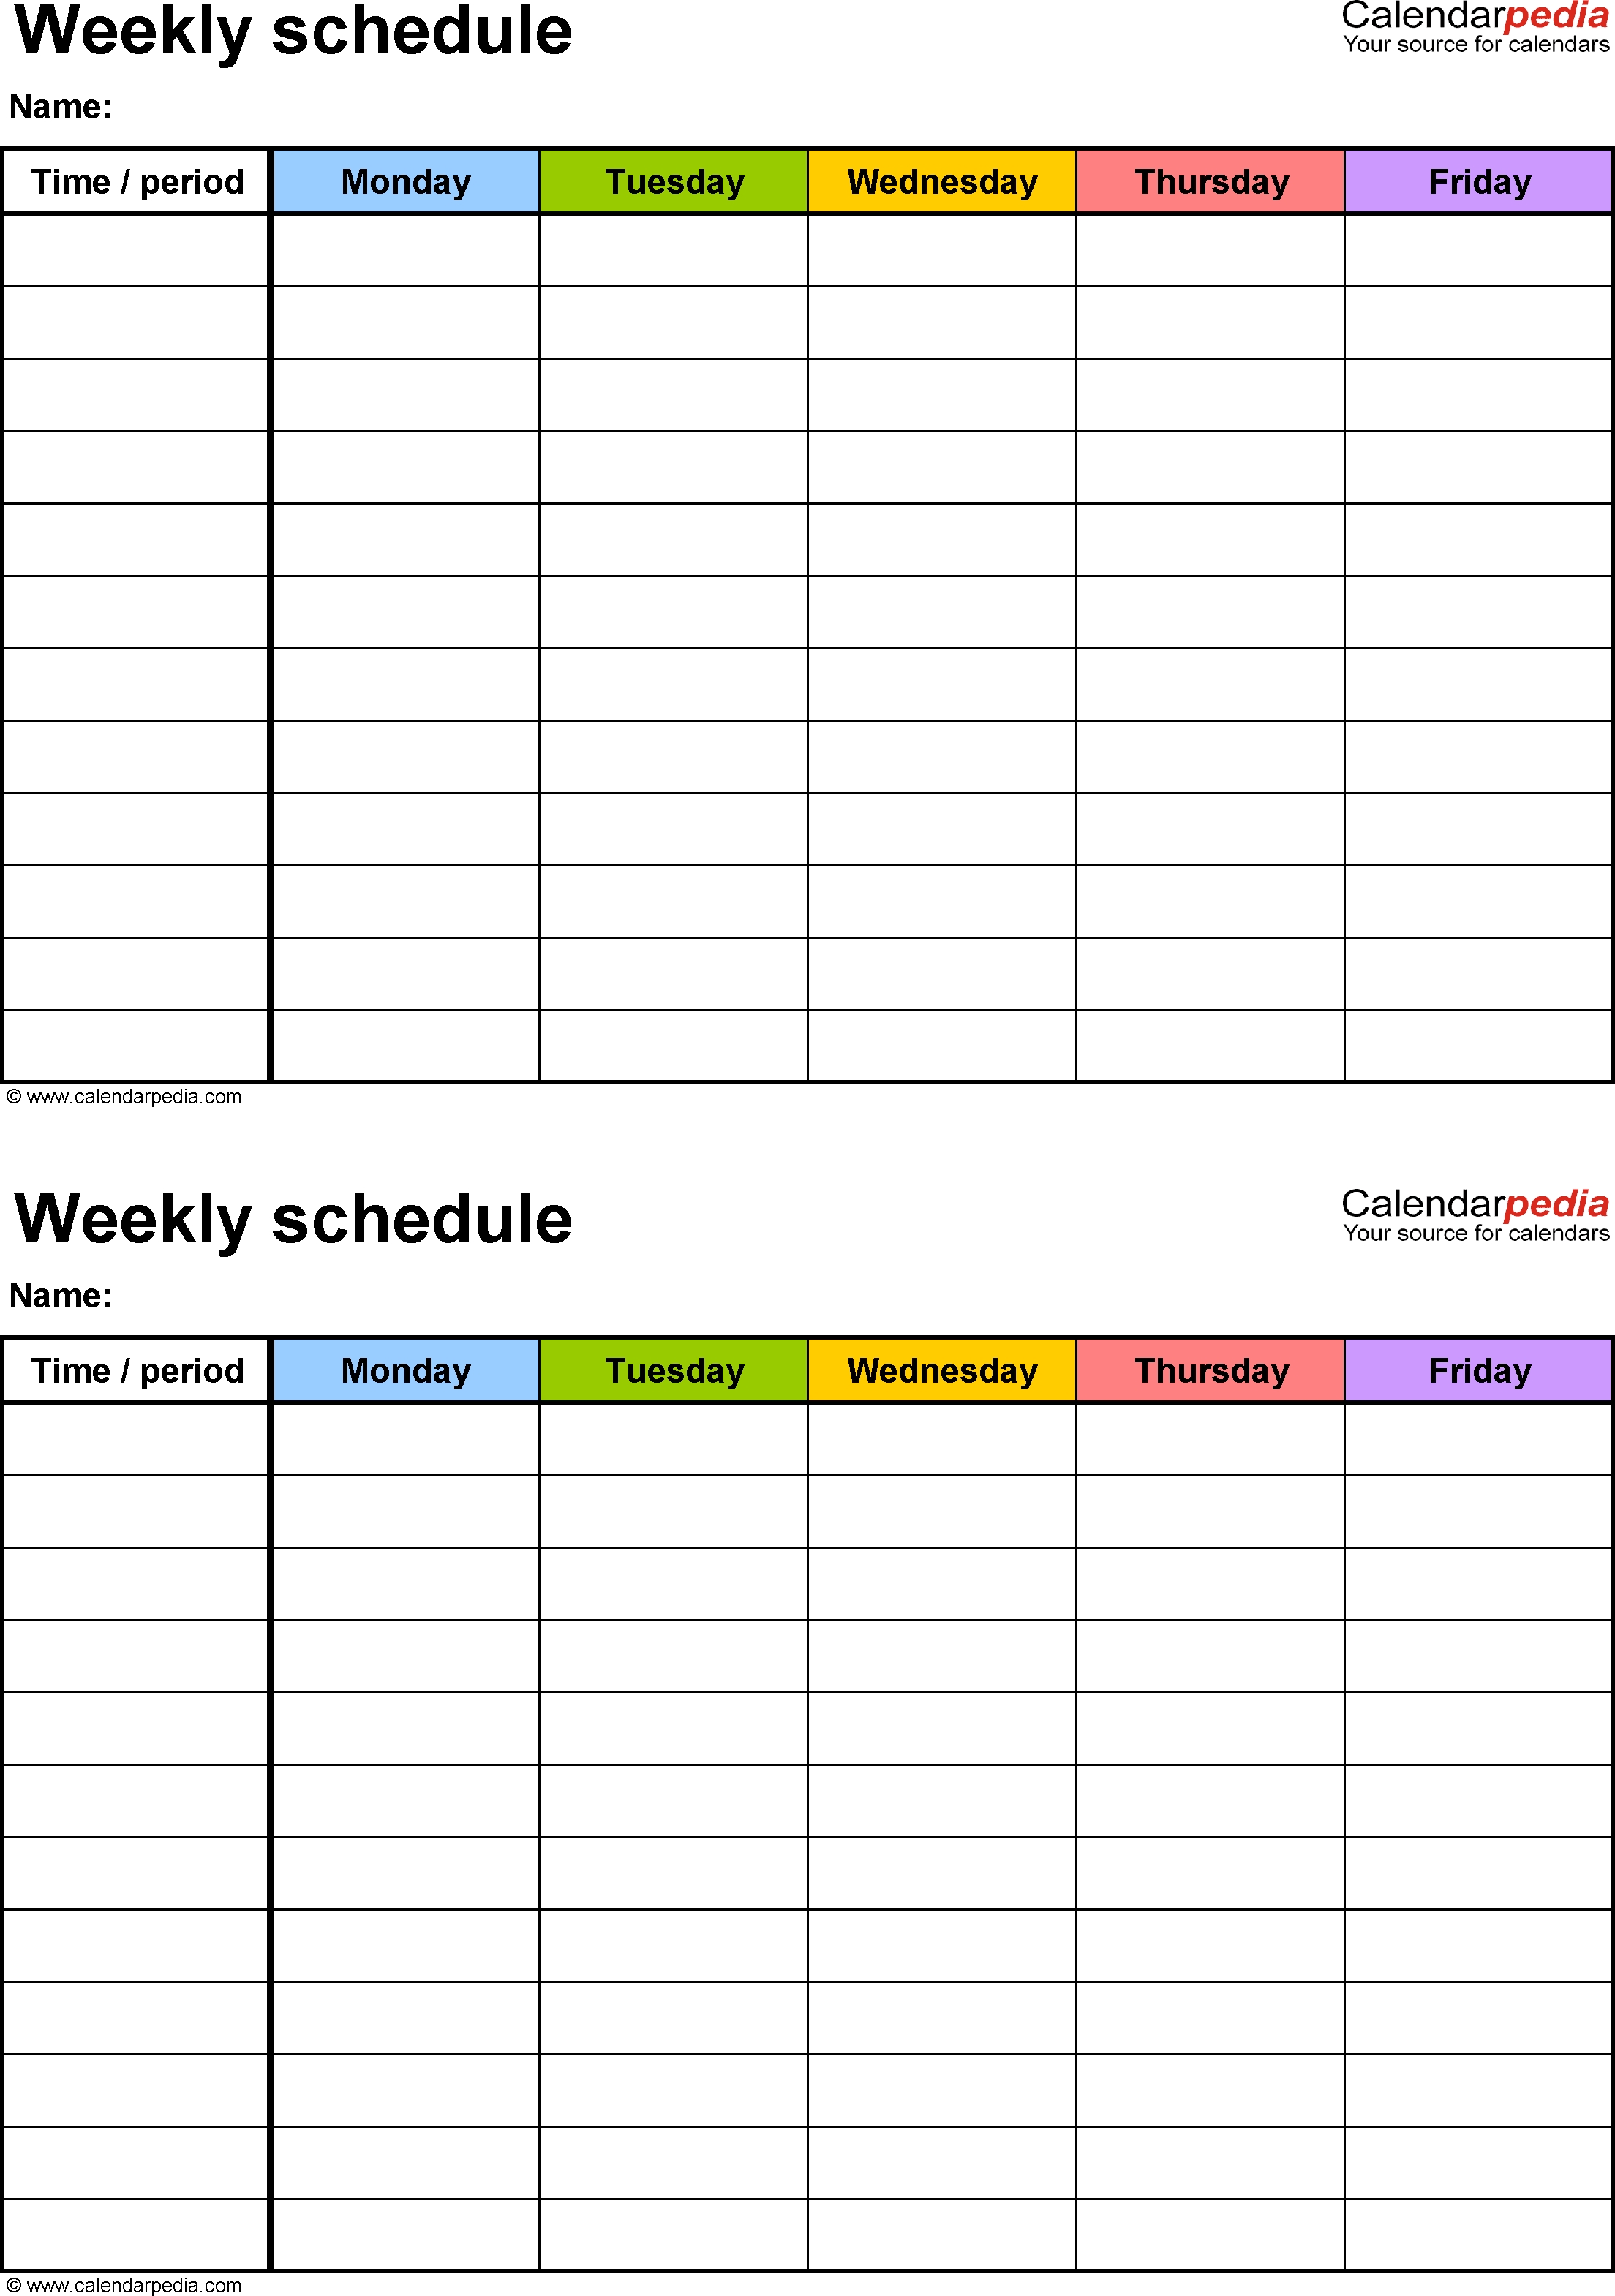 Free Weekly Schedule Templates For Pdf - 18 Templates 2 Day Calendar Template